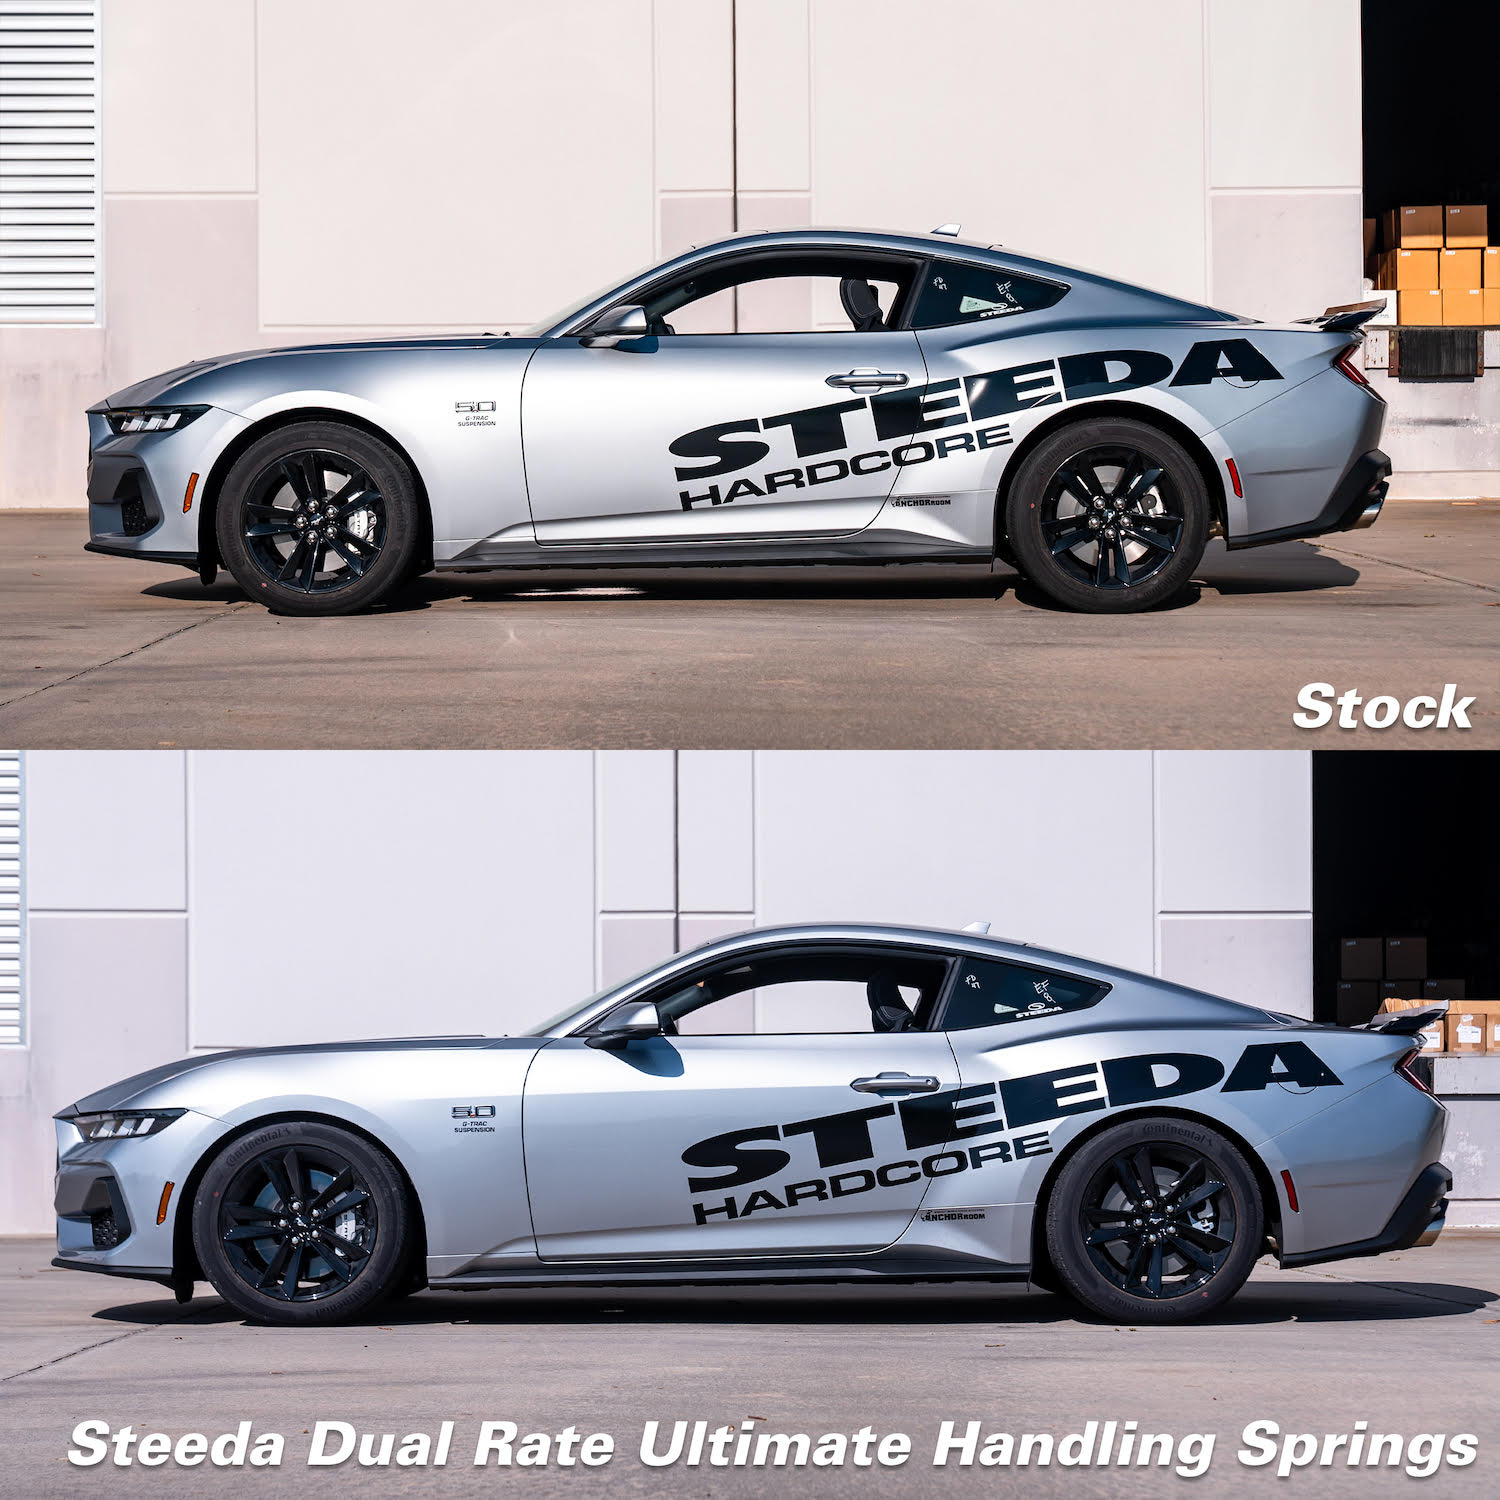 S650 Mustang Now Available - Steeda Lowering Springs for the S650 1694562735606